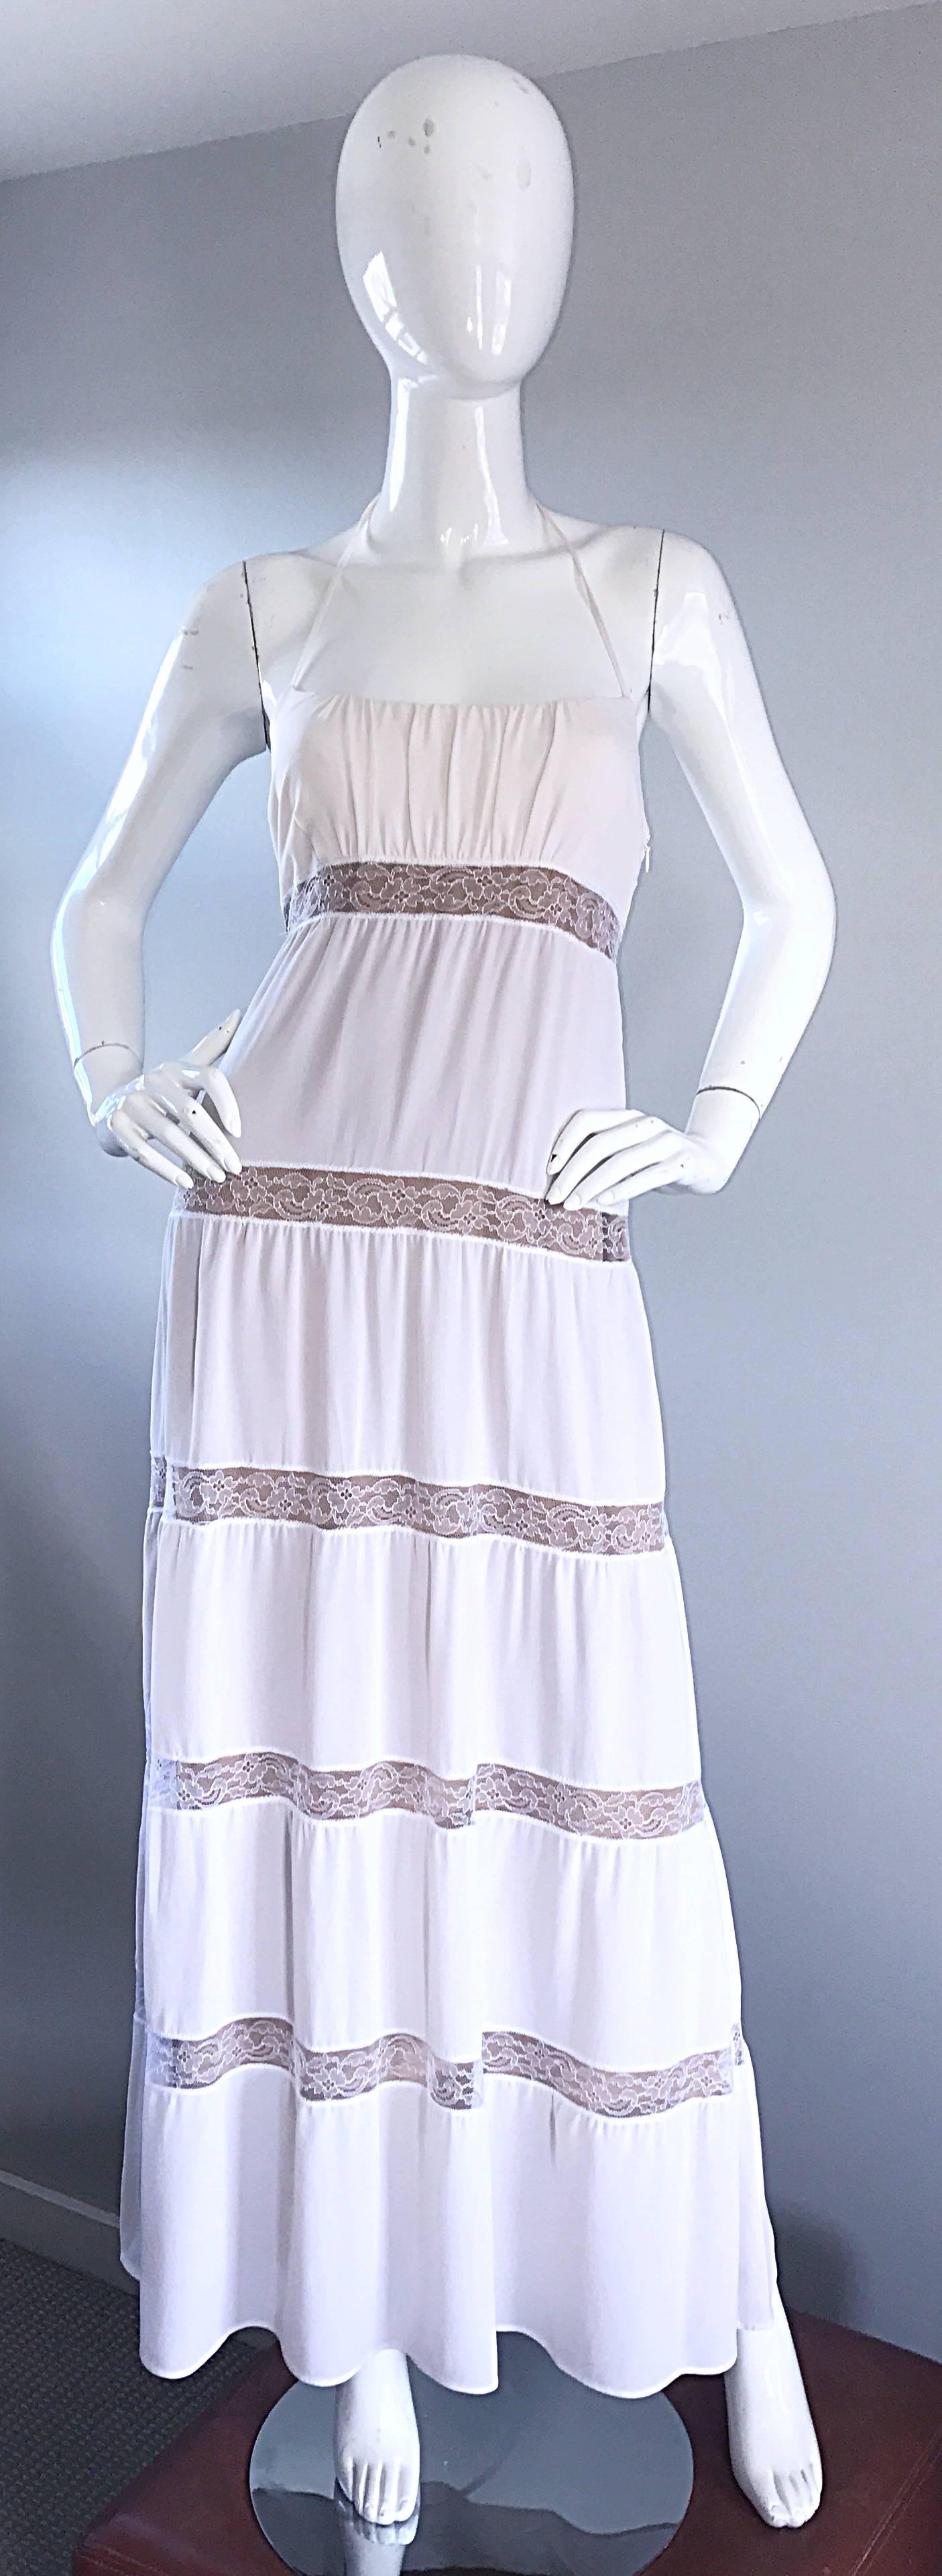 Gorgeous MICHAEL KORS COLLECTION white and nude / tan silk maxi dress! Features strips of lace throughout the dress that reveal the nude lining. Halter neck ties at the back neck. Flattering ruching on the bodice. Hidden zipper up the side with